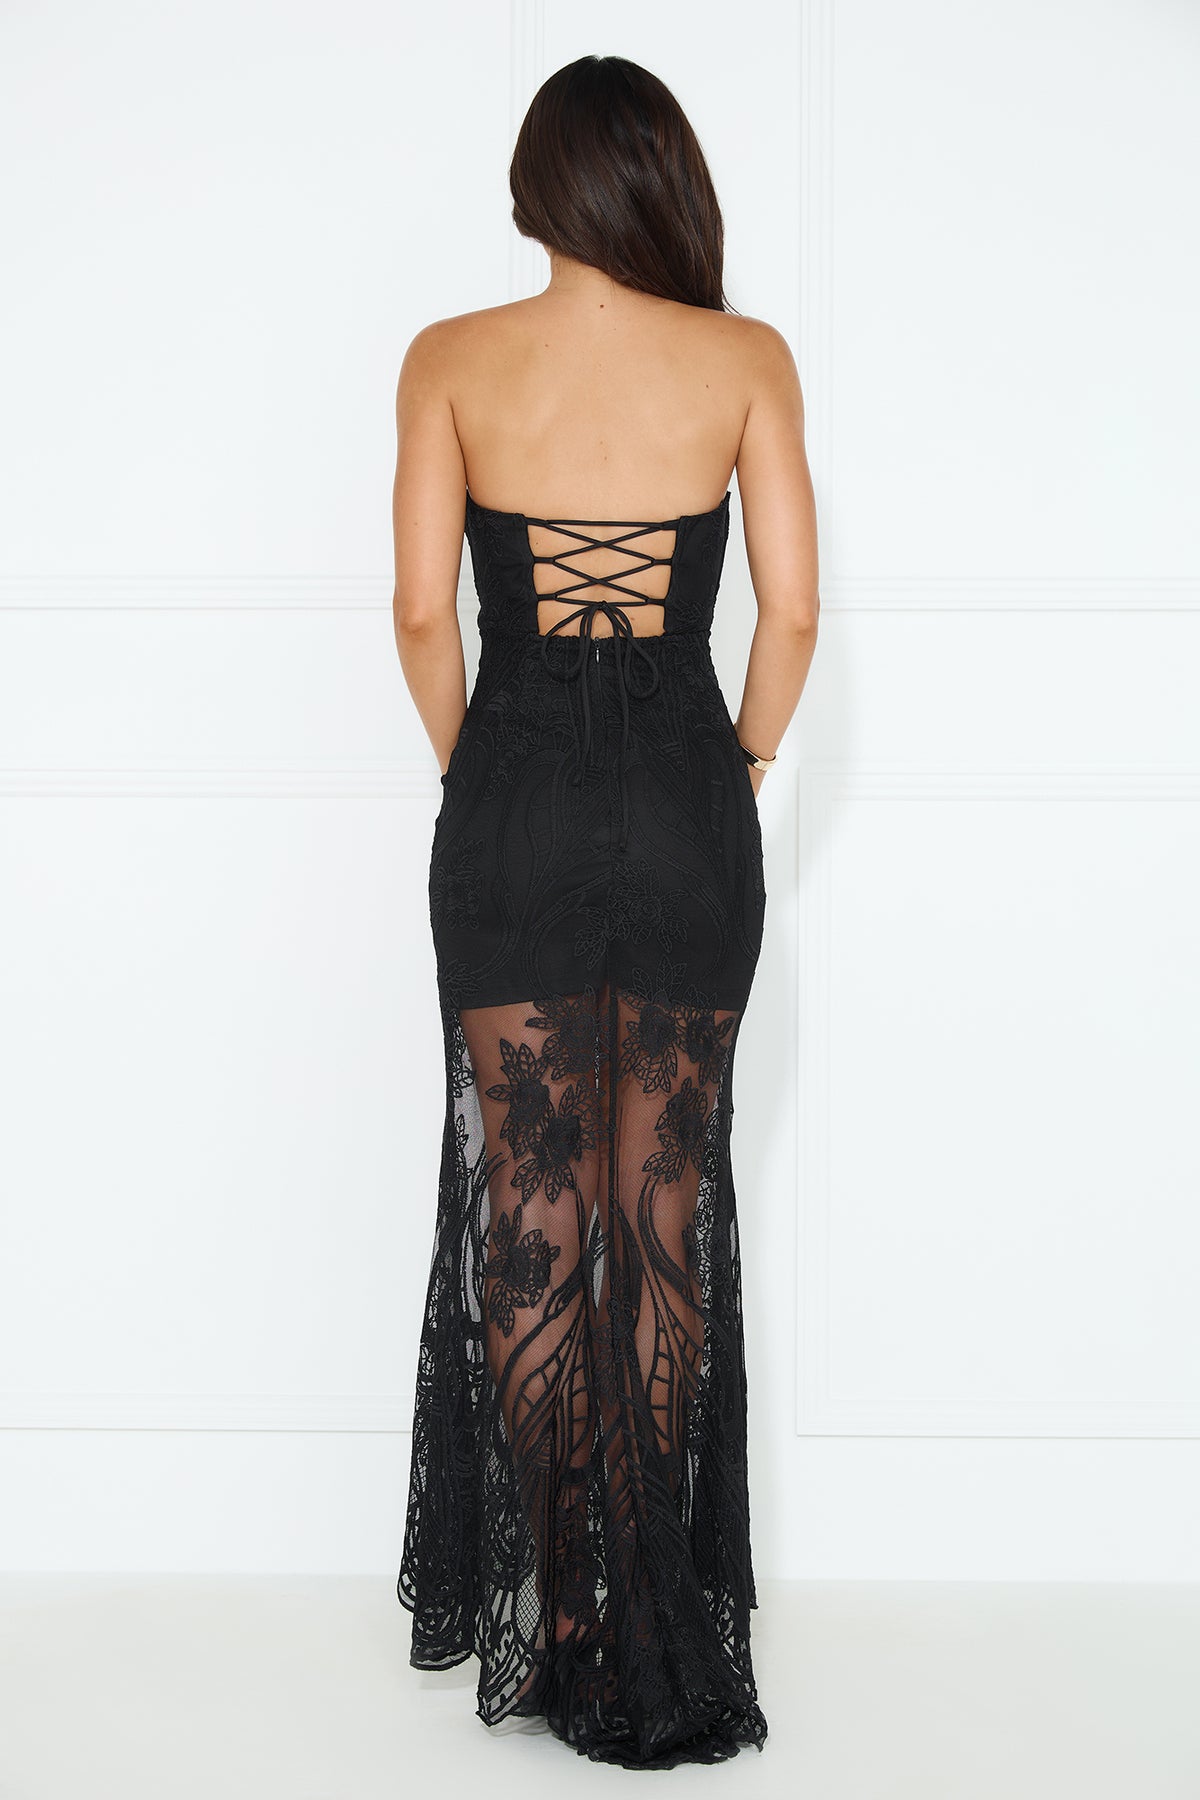 Shop Formal Dress - Piano In The Distance Strapless Lace Maxi Dress Black fourth image